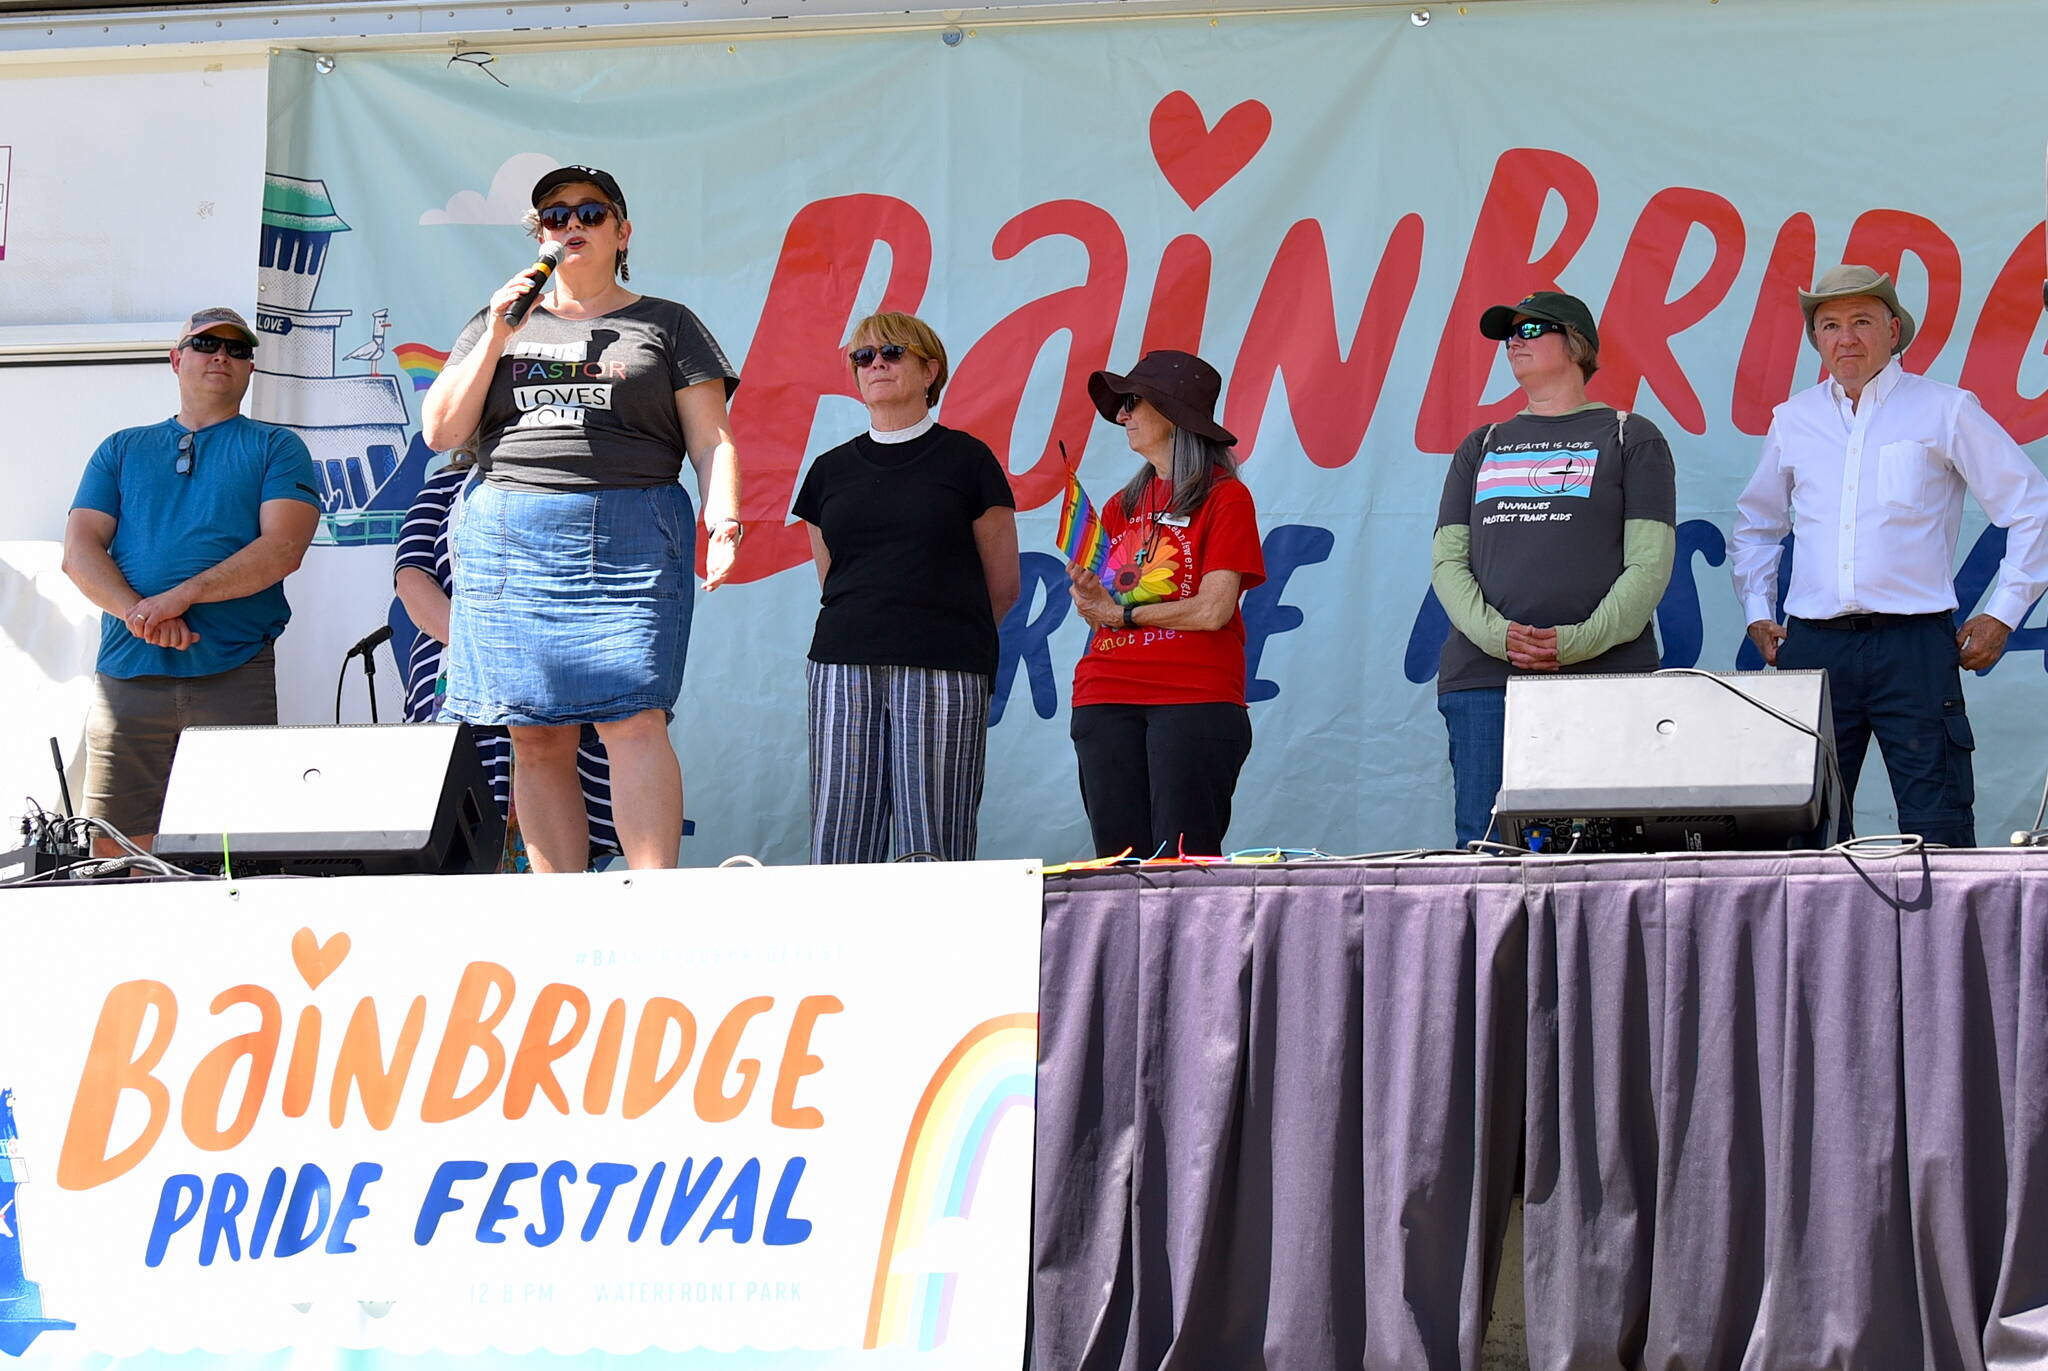 A group of Bainbridge and local clergy speak at the festival about acceptance and faith. Nancy Treder/Kitsap News Group Photos